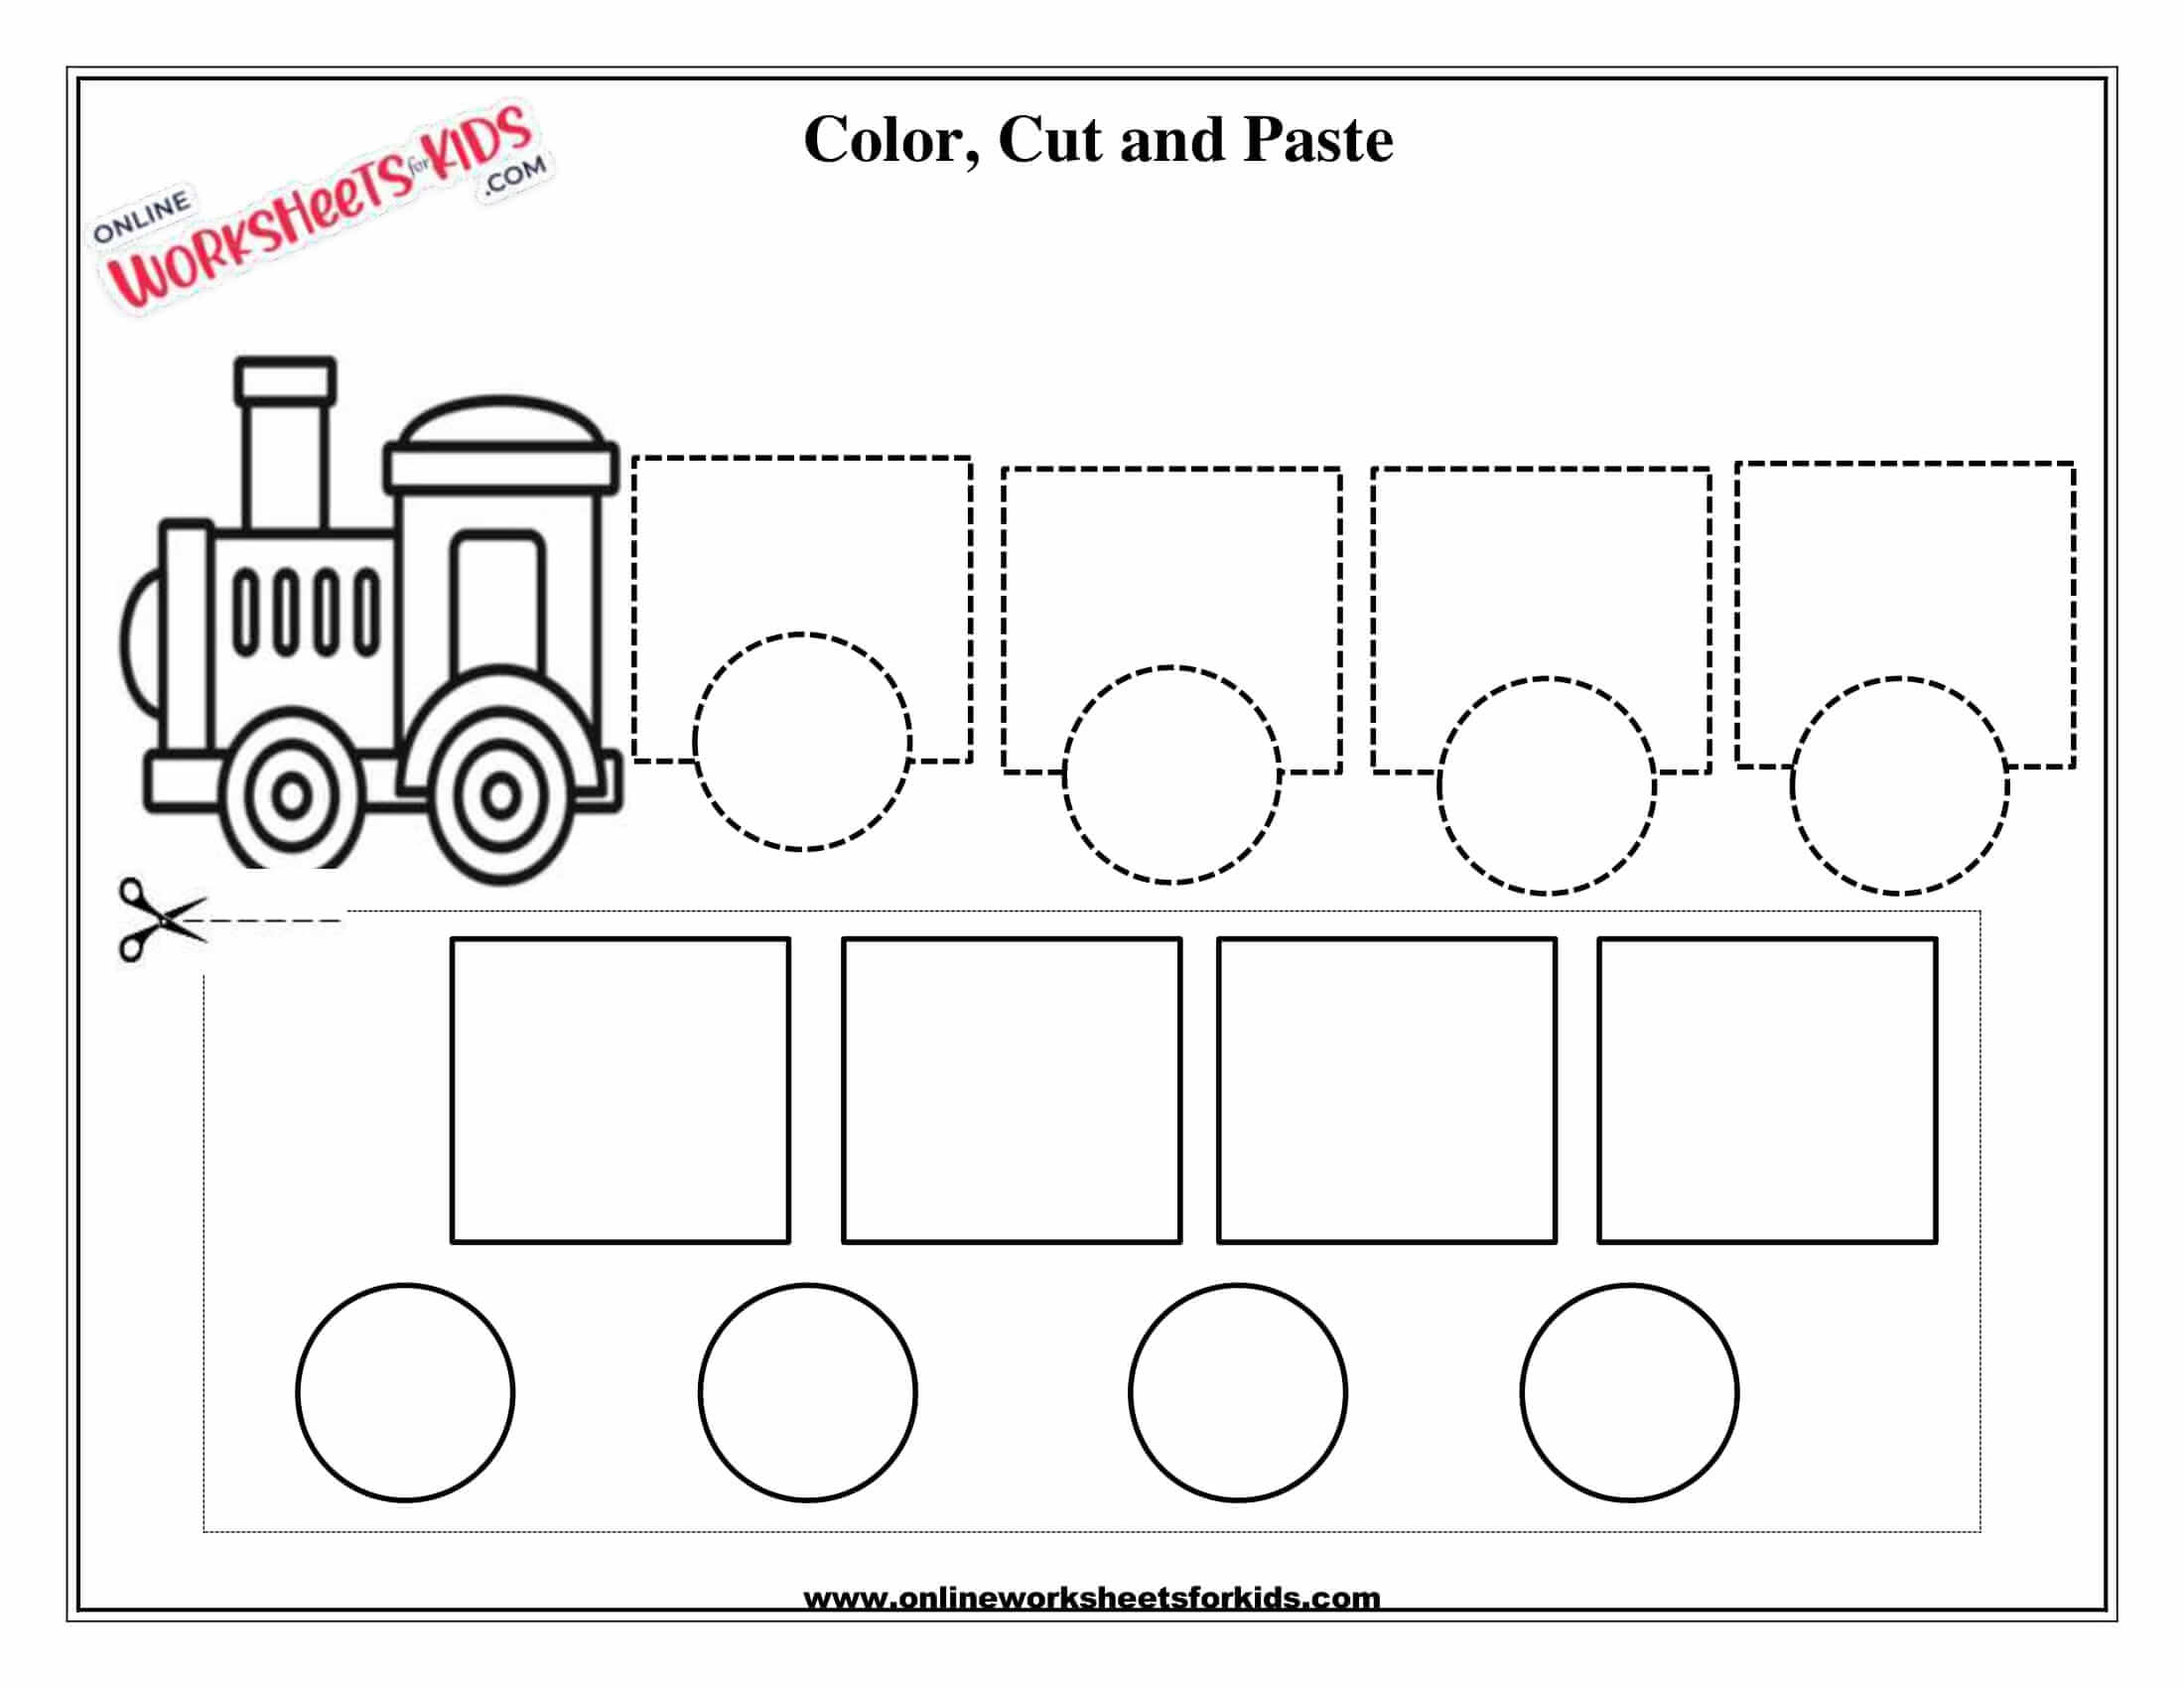 download free cut and paste shapes square and circle worksheets